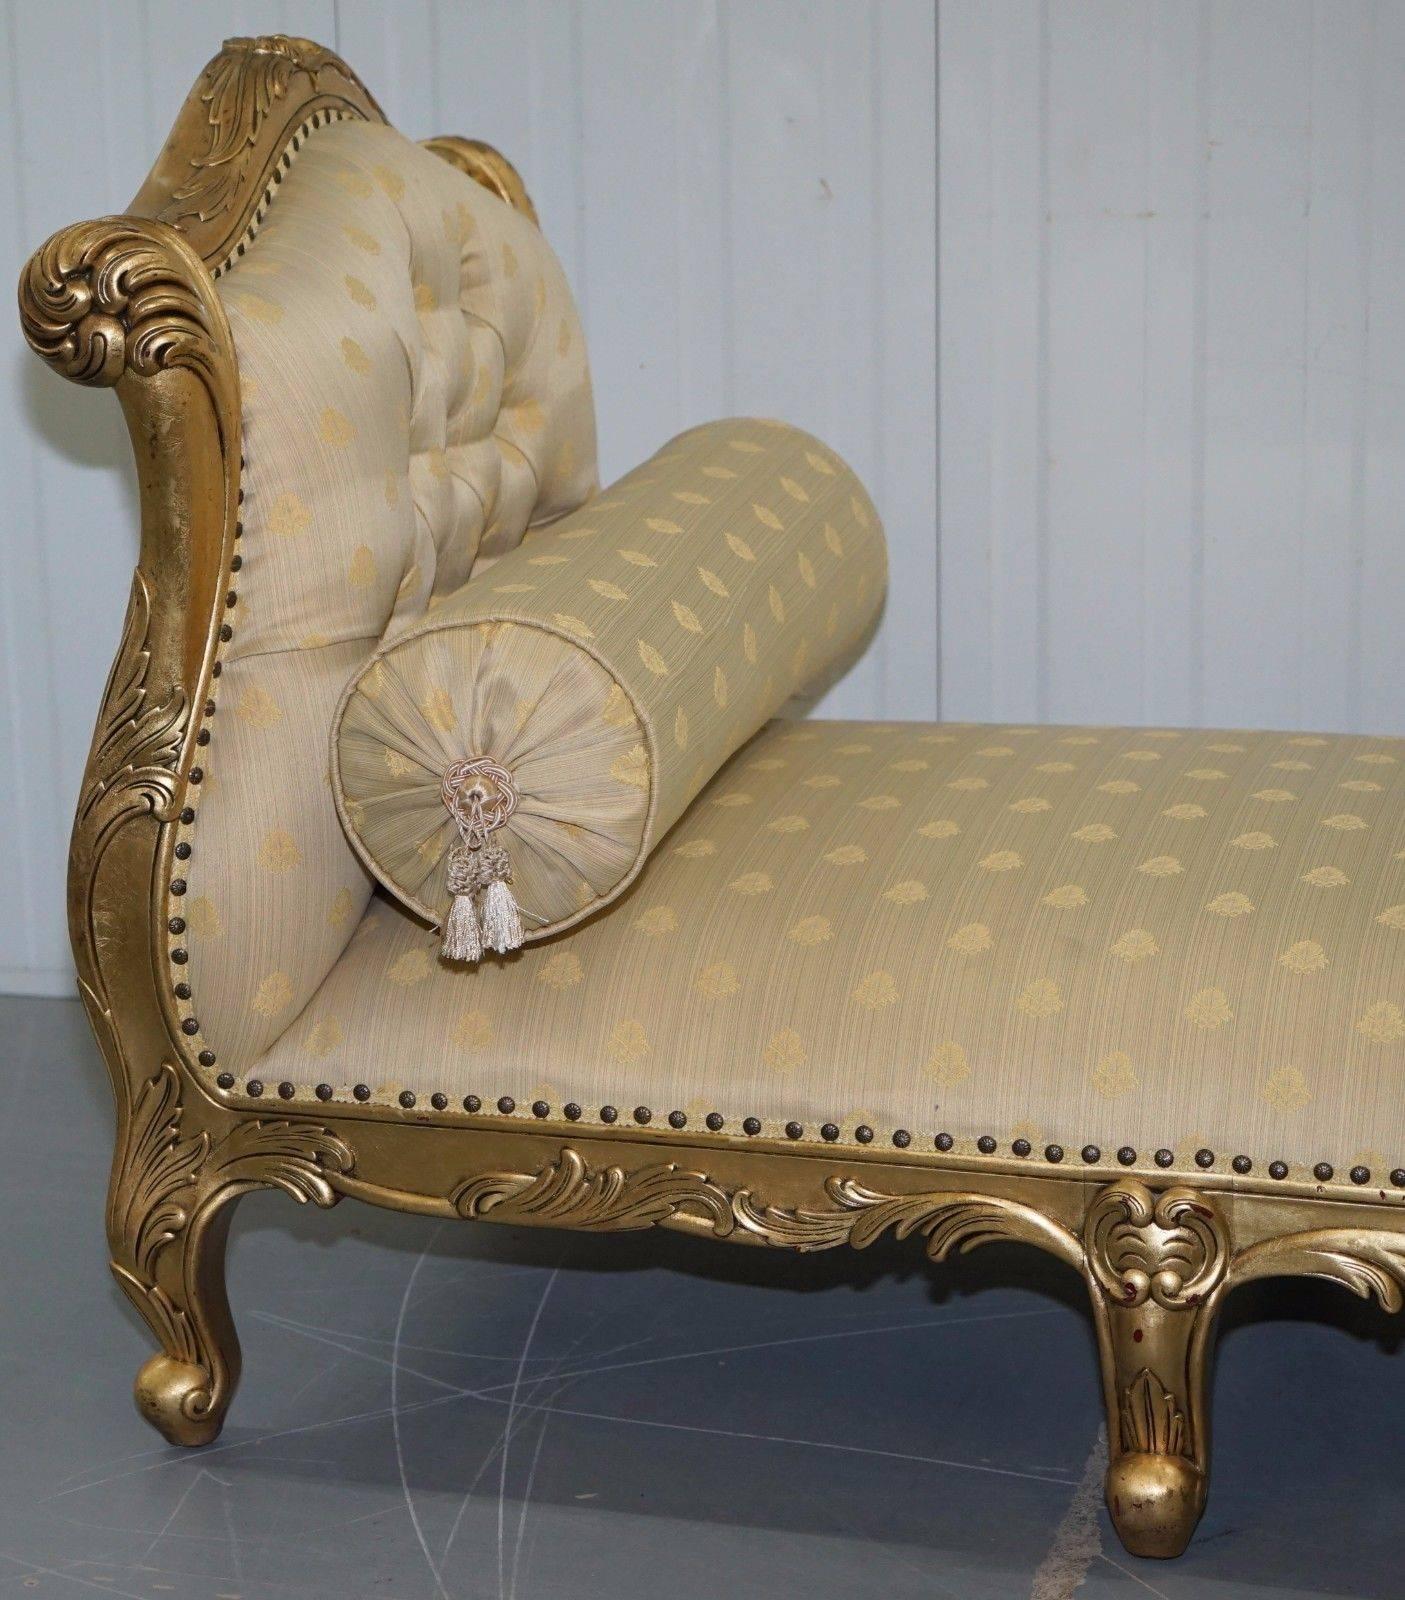 We are delighted to offer for sale this stunning Victorian style French gold leaf painted day bed / chaise lounge to seat three-four people

A very good looking comfortable piece, long enough for pretty much anyone to have a snooze on, the inside